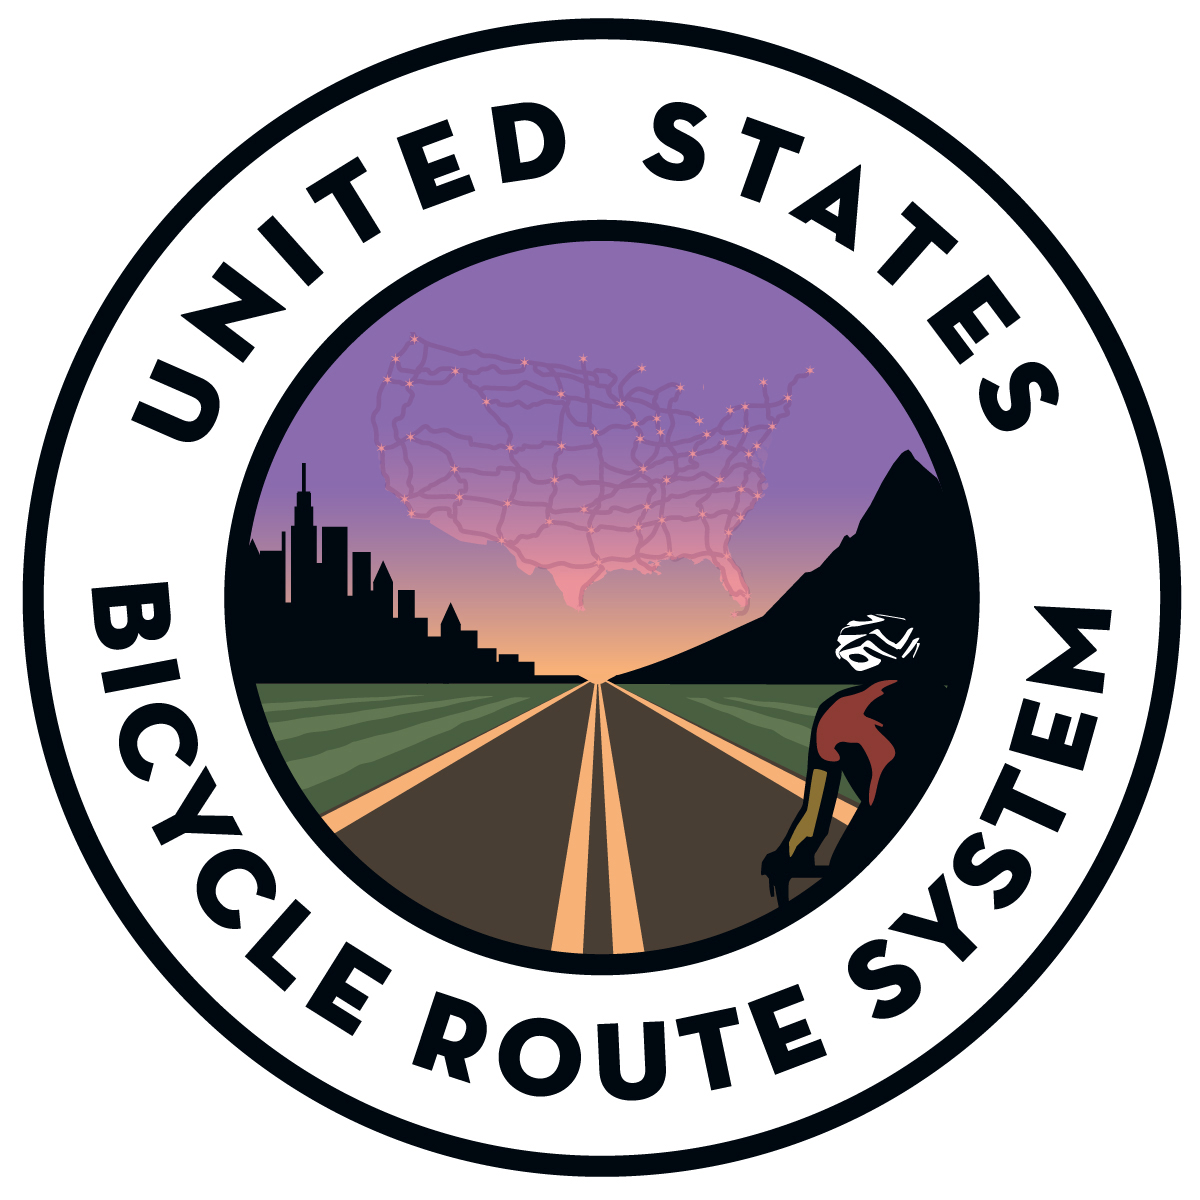 U.S. Bicycle Route System